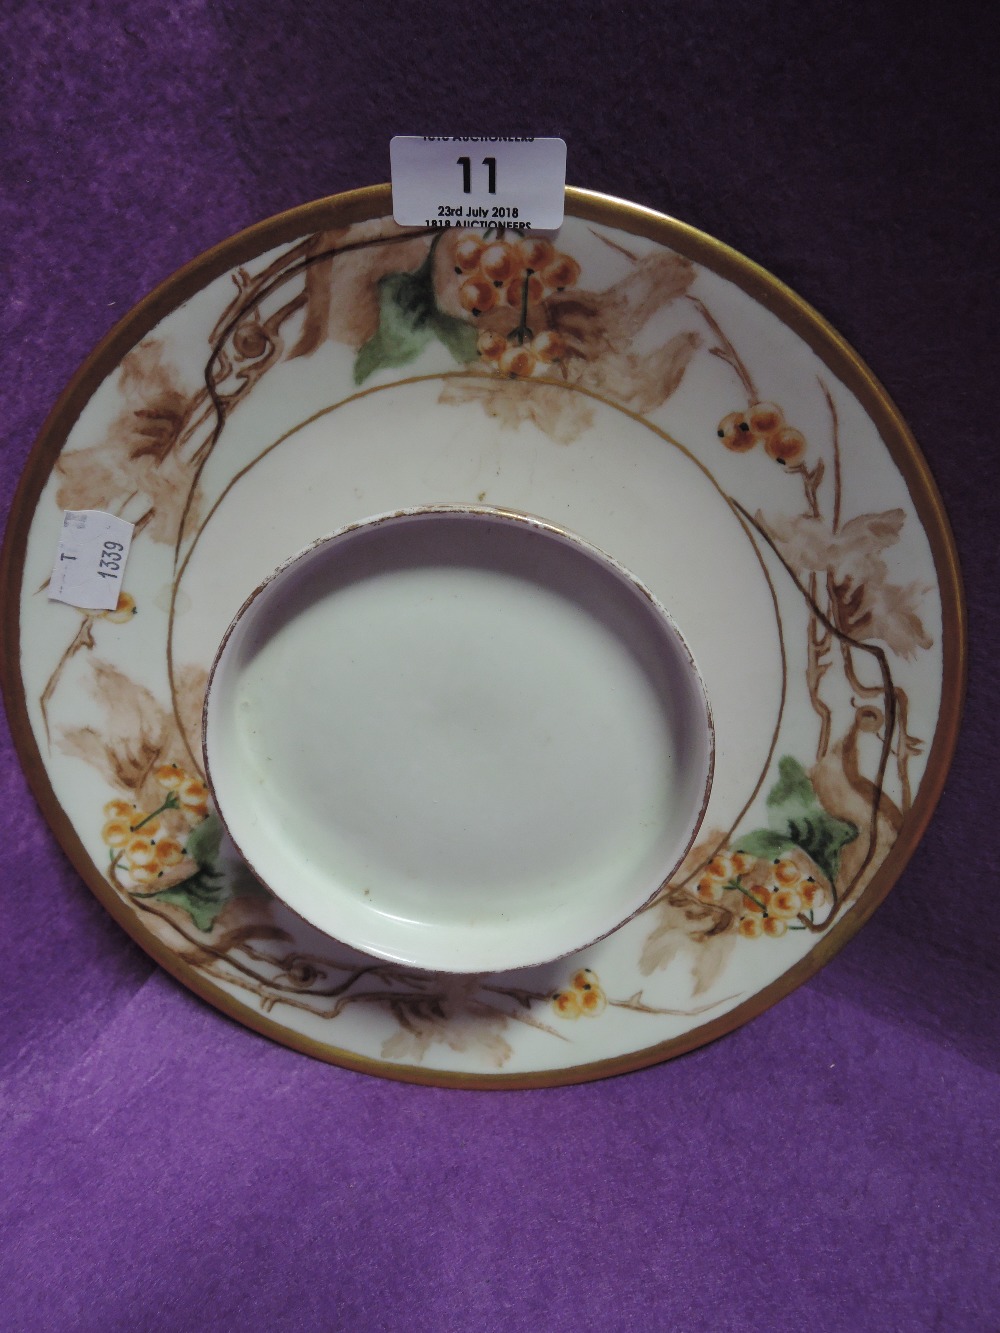 A vintage ceramic hand decorated plate by Limoges